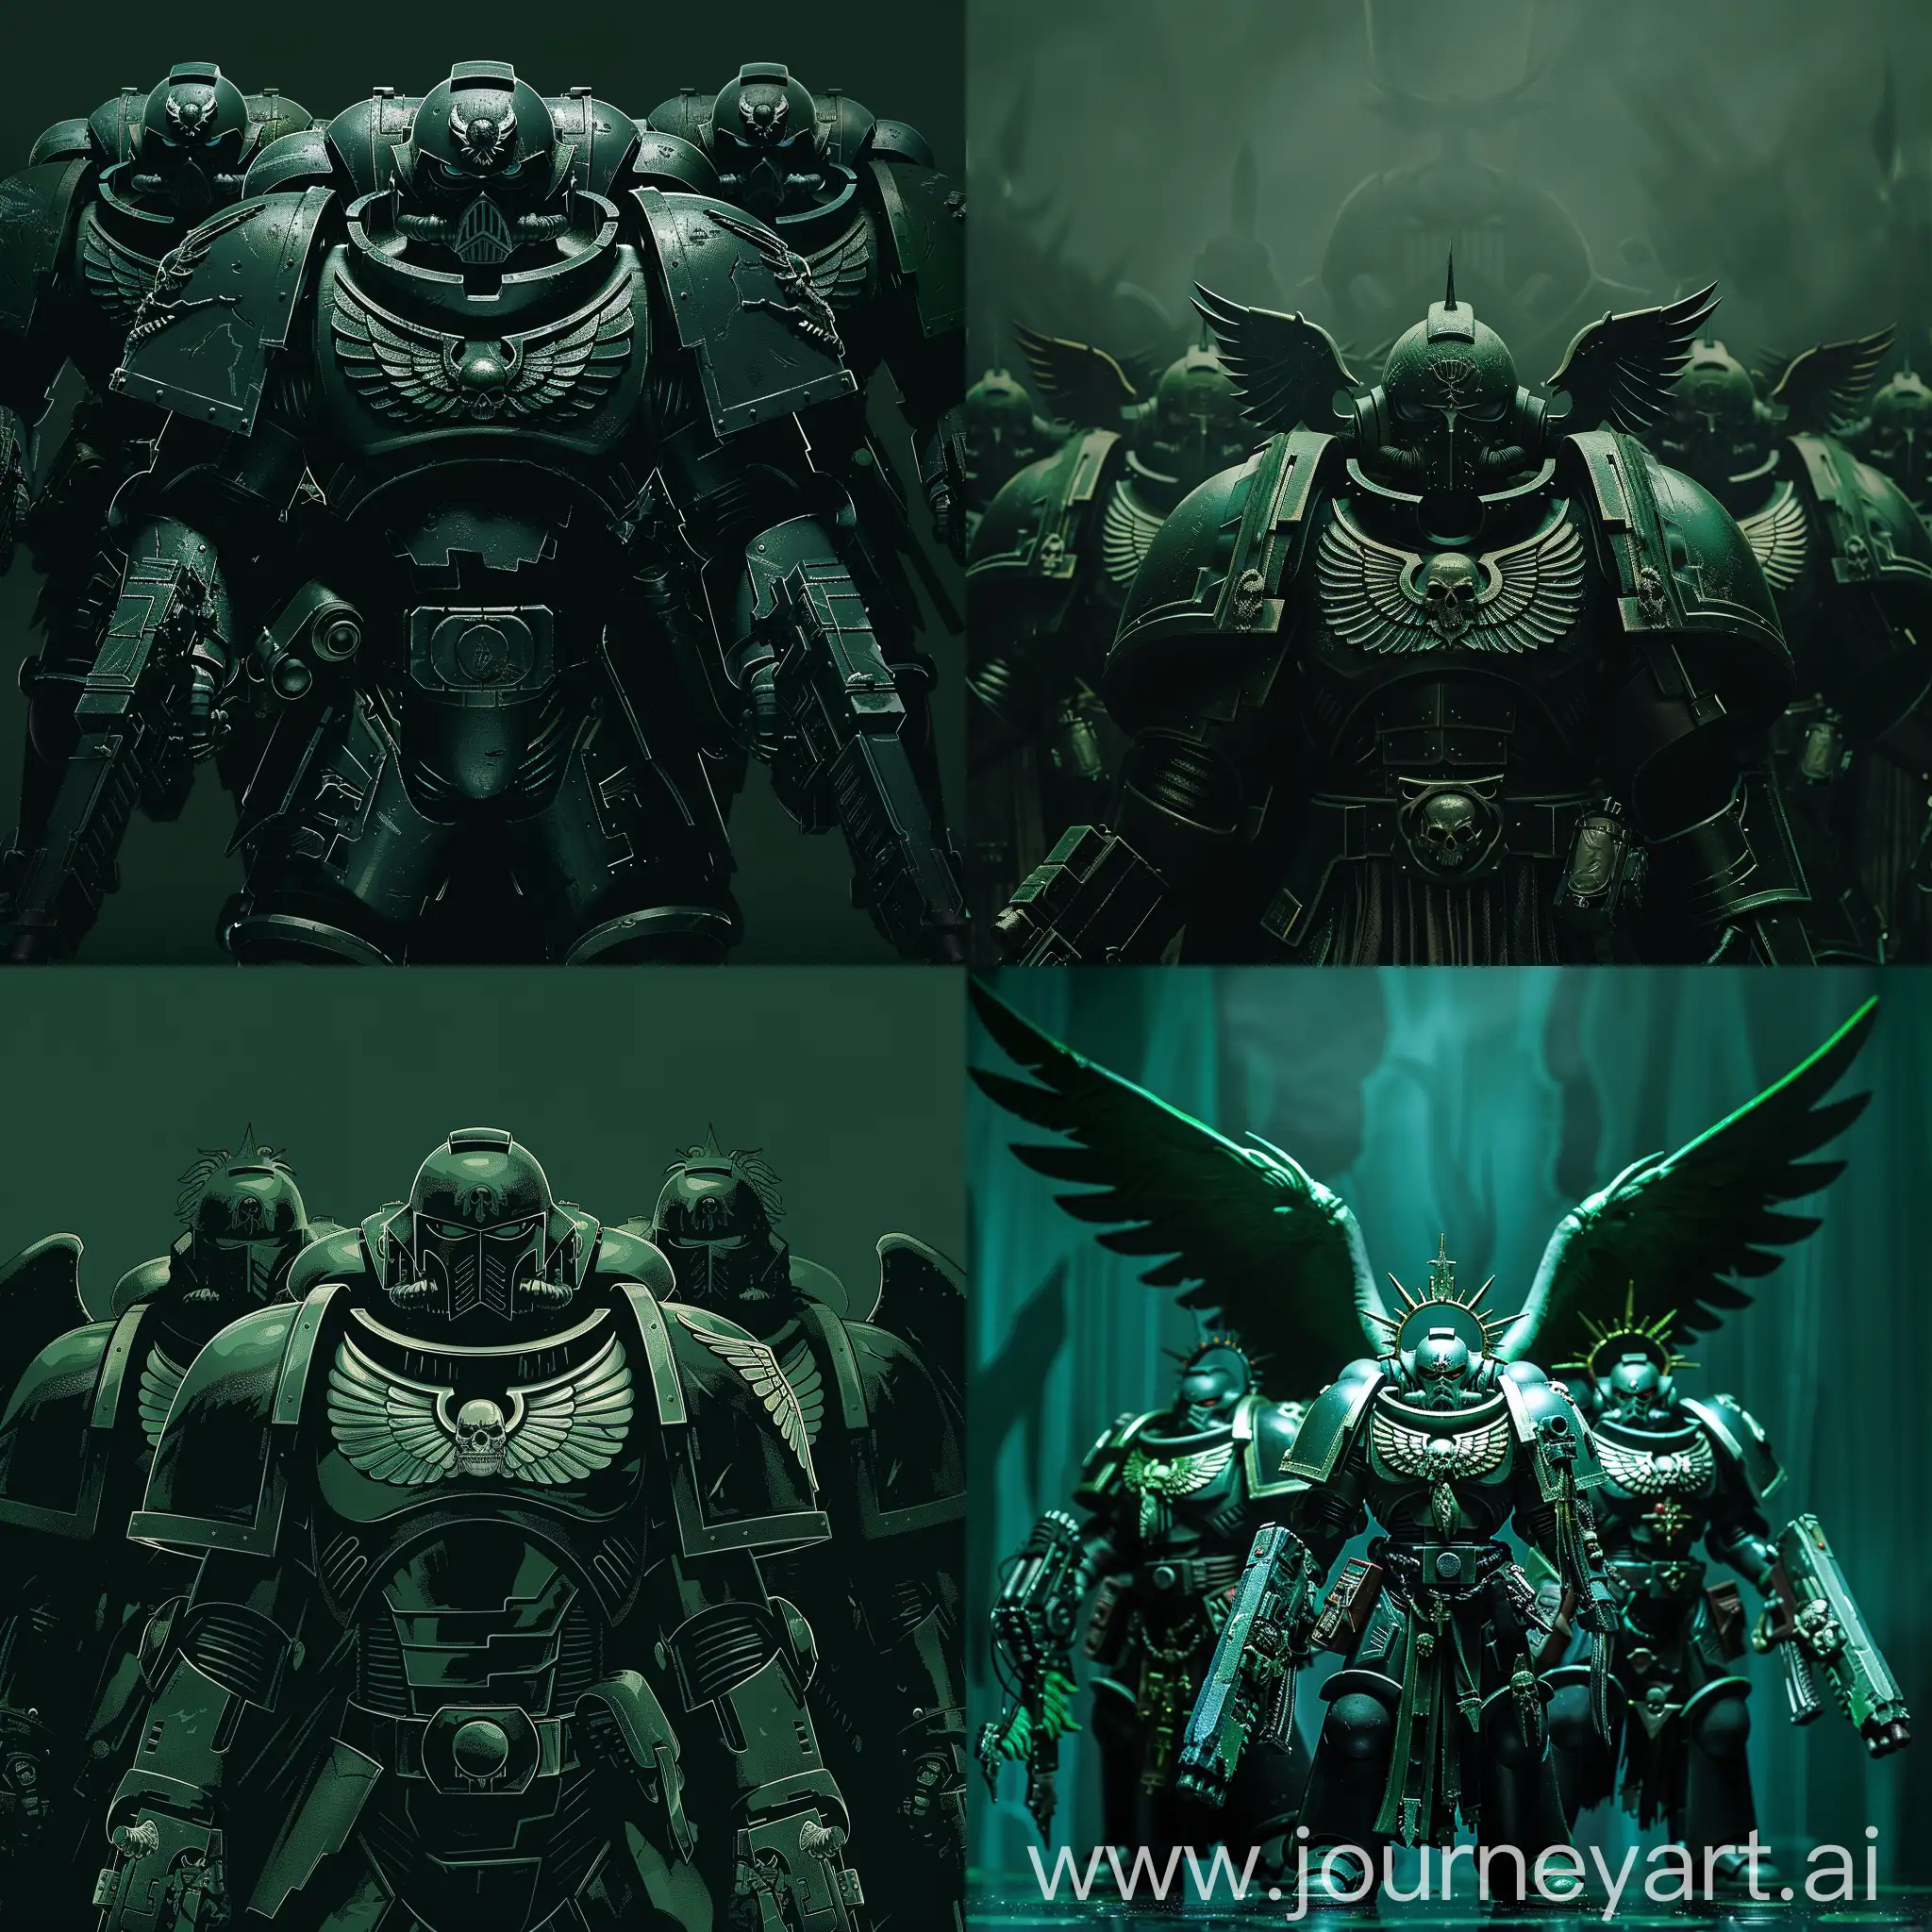 The Dark Angels from the Warhammer 40k universe. The background is dark green.